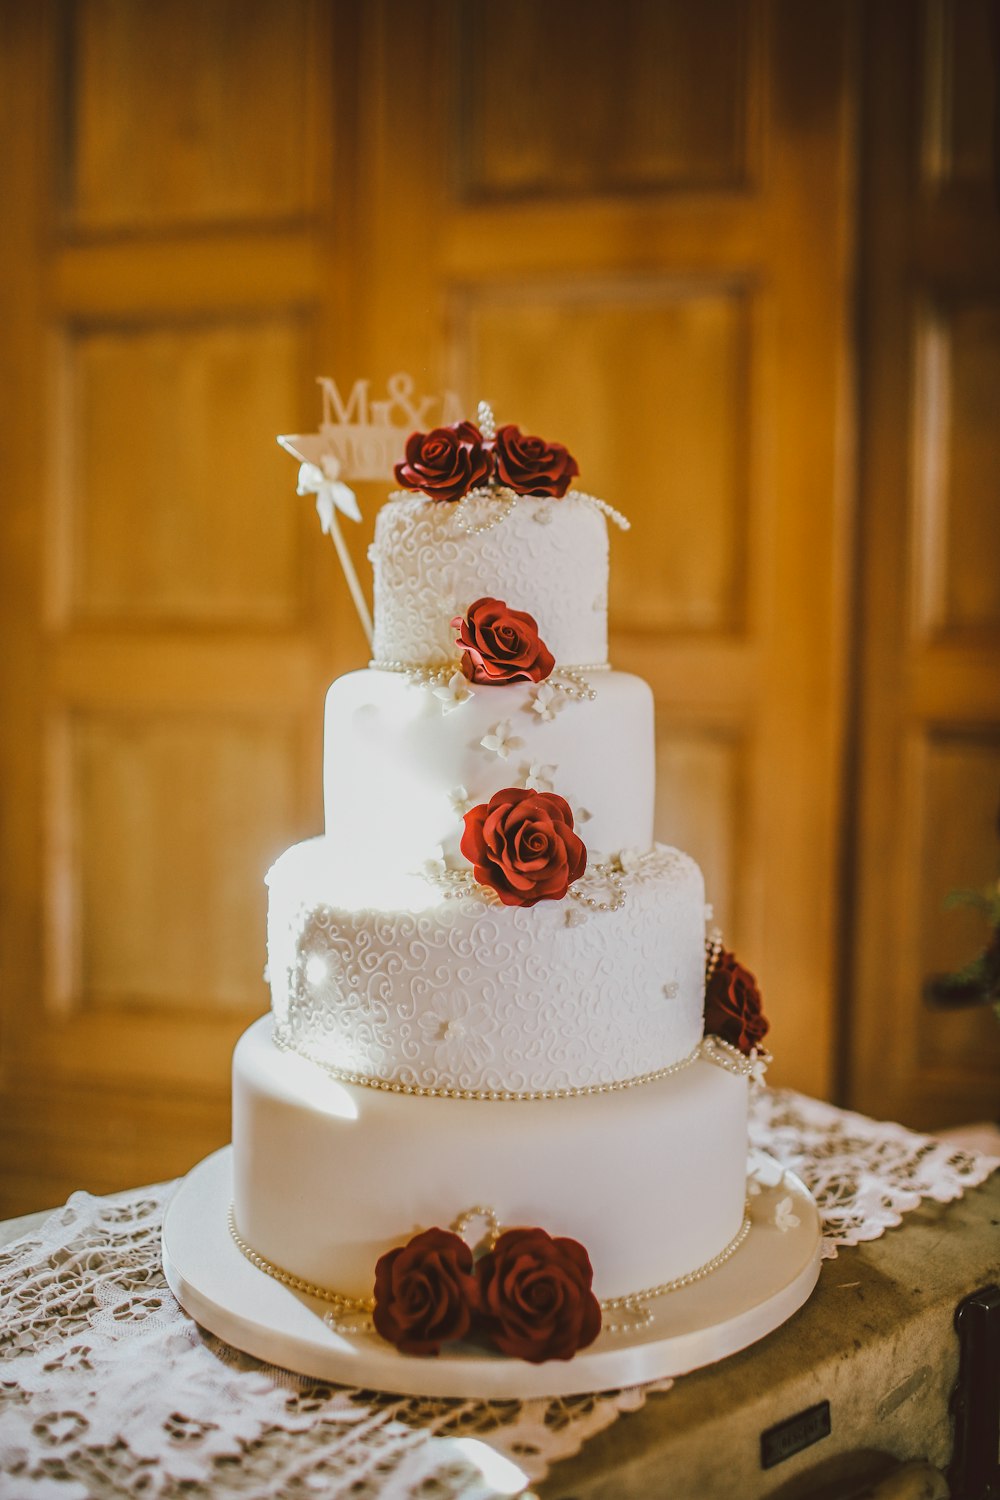 Wedding Cake Ideas - The Best Way To Decorate Your Wedding Cake